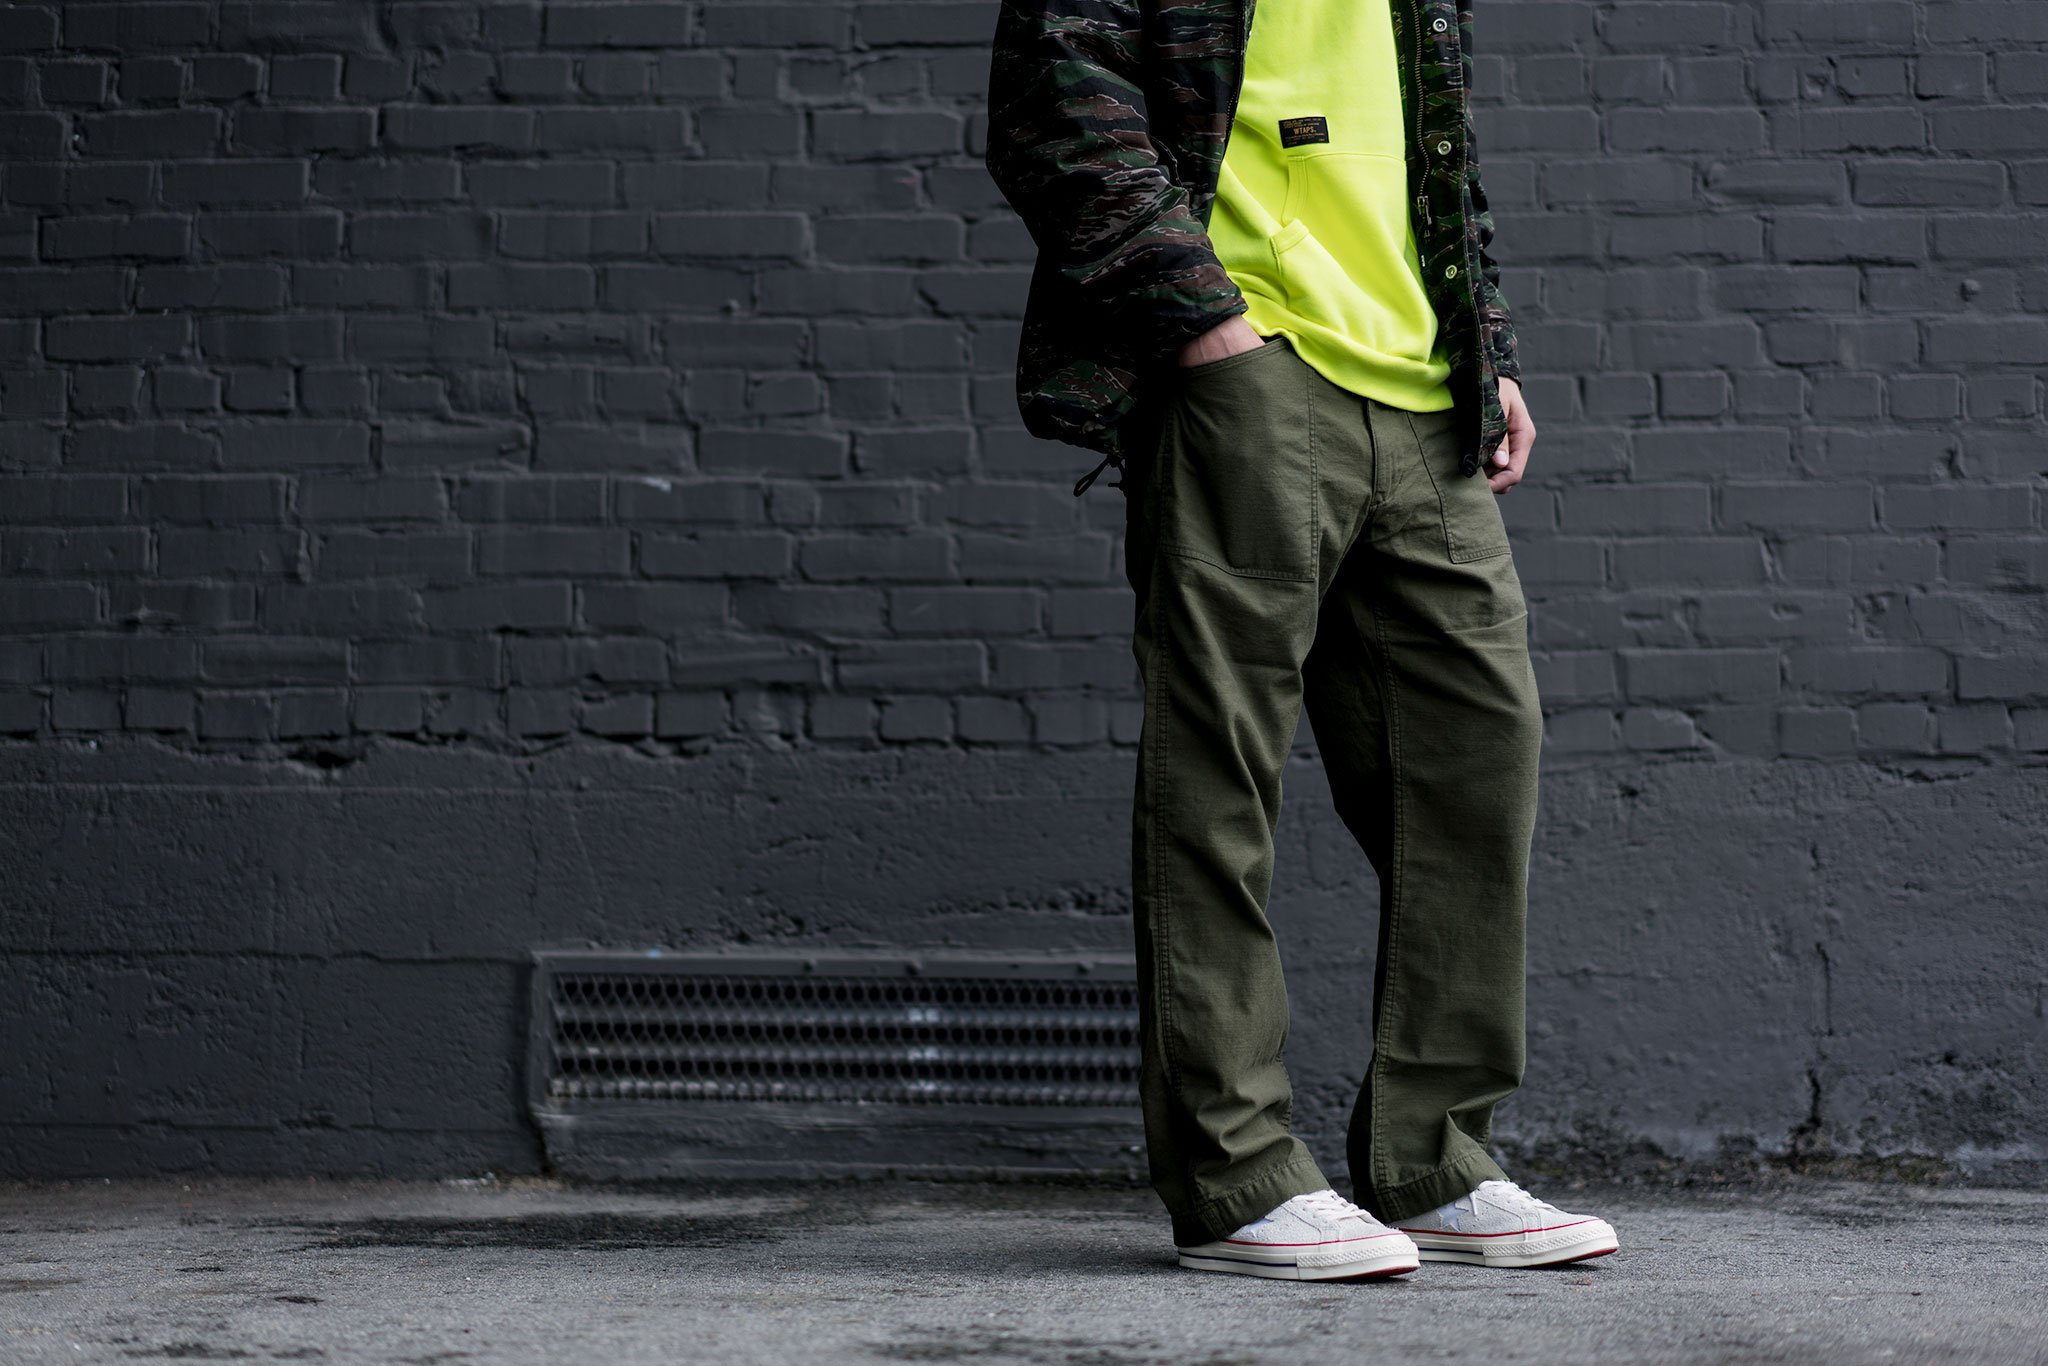 HAVEN highlights their latest delivery from the WTAPS EX.34 